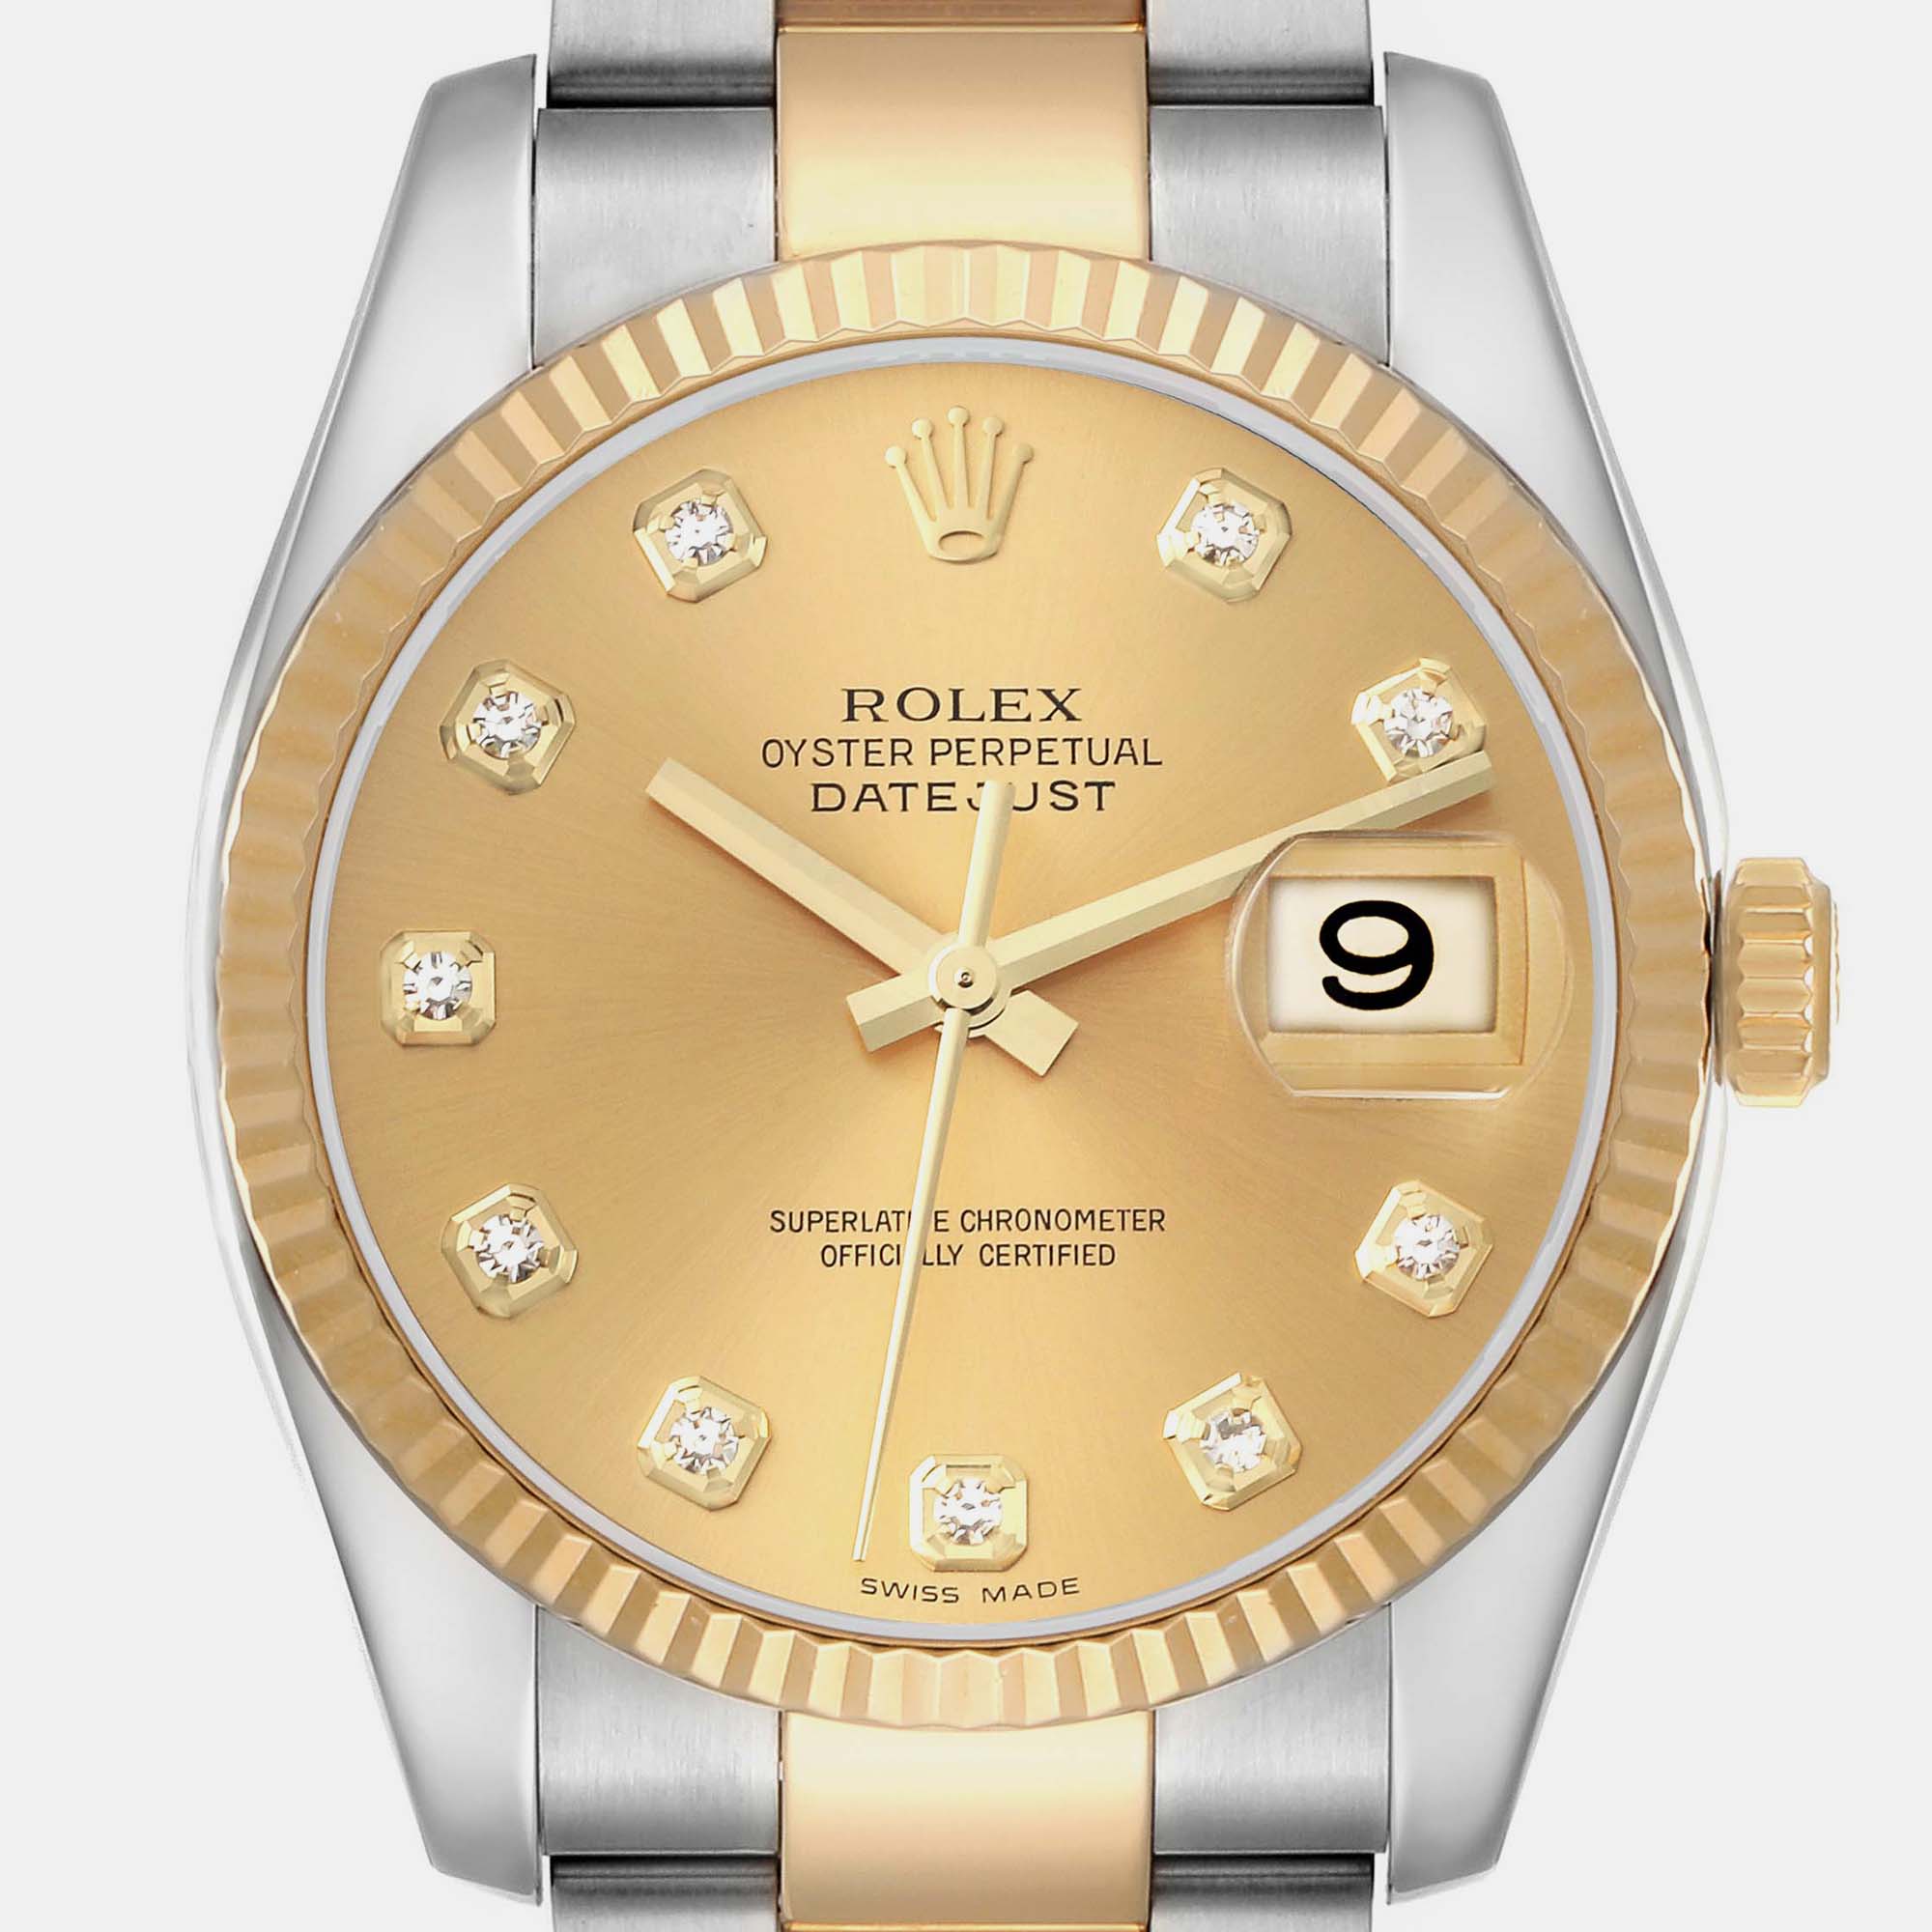 Rolex Datejust Steel Yellow Gold Champagne Diamond Dial Mens Watch 116233 36 Mm